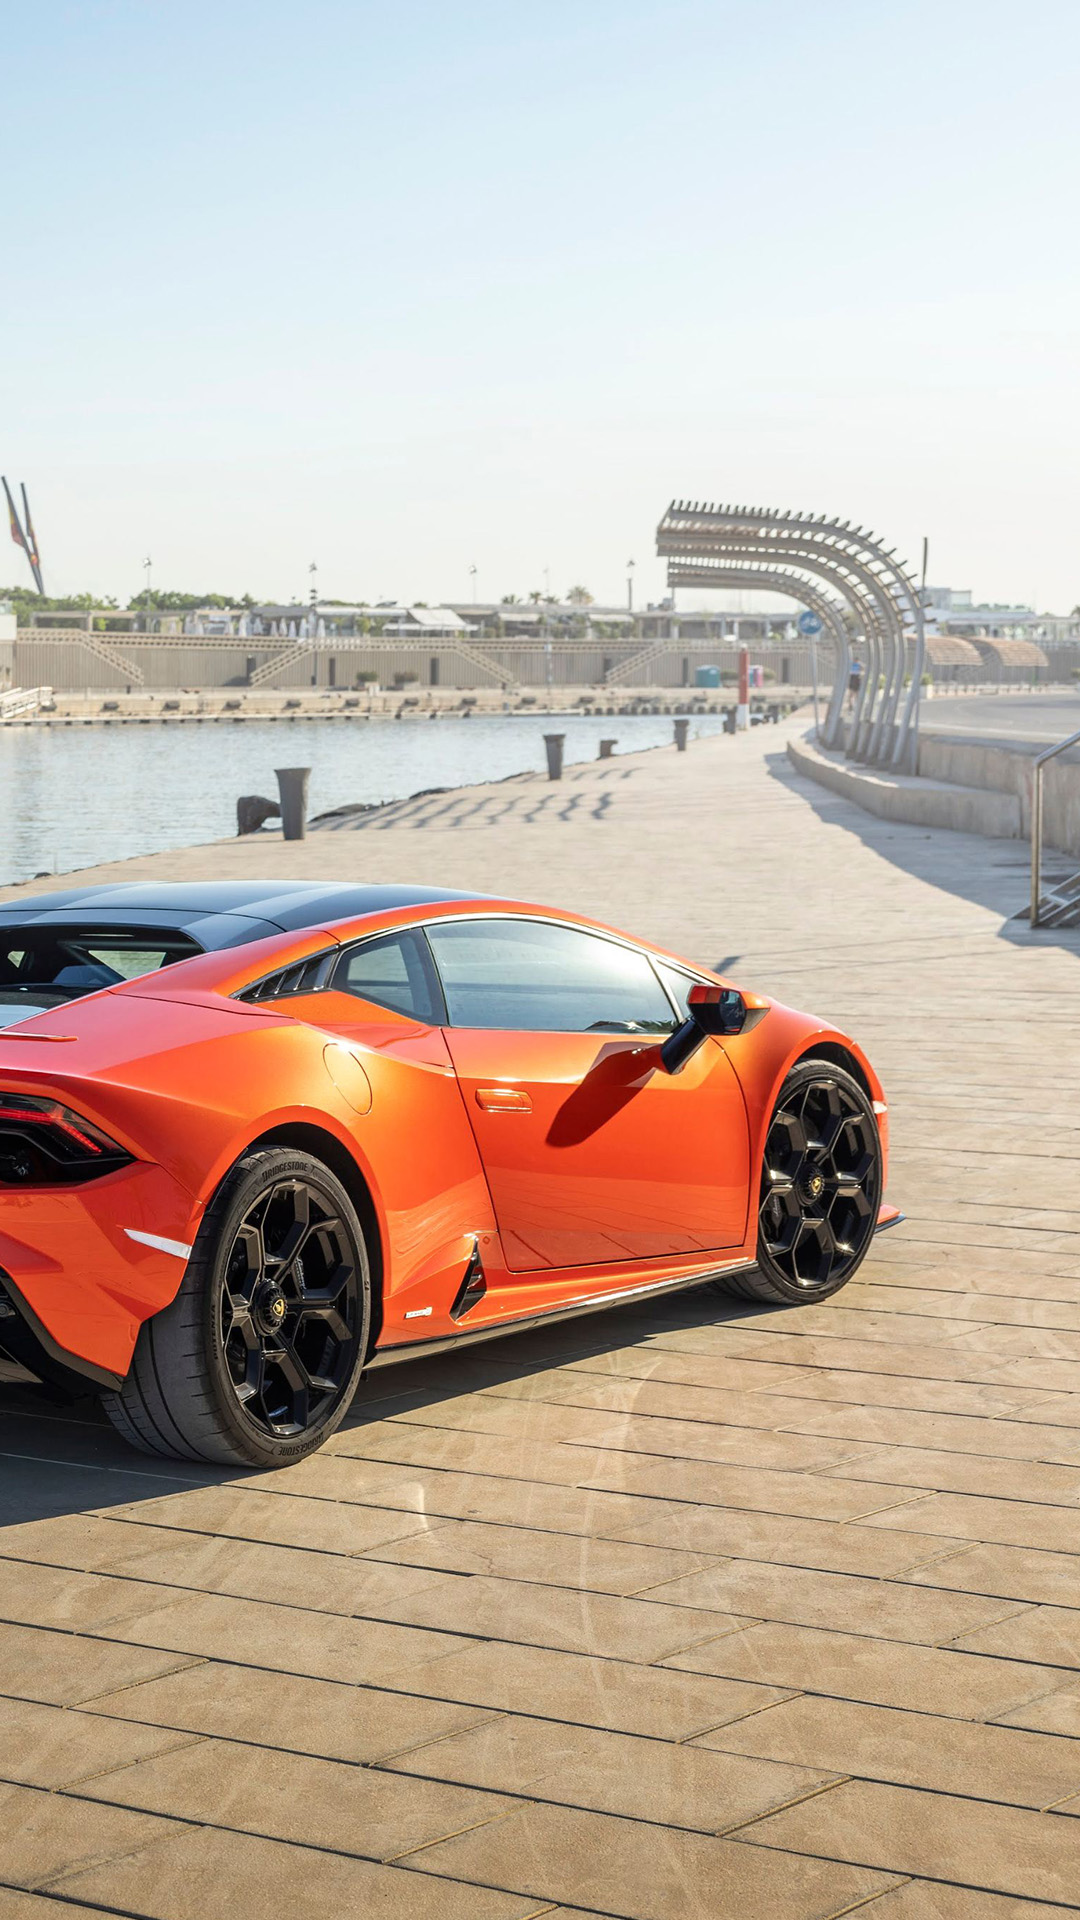 American Force Xxx Video - Lamborghini HuracÃ¡n- Technical Specifications, Pictures, Videos